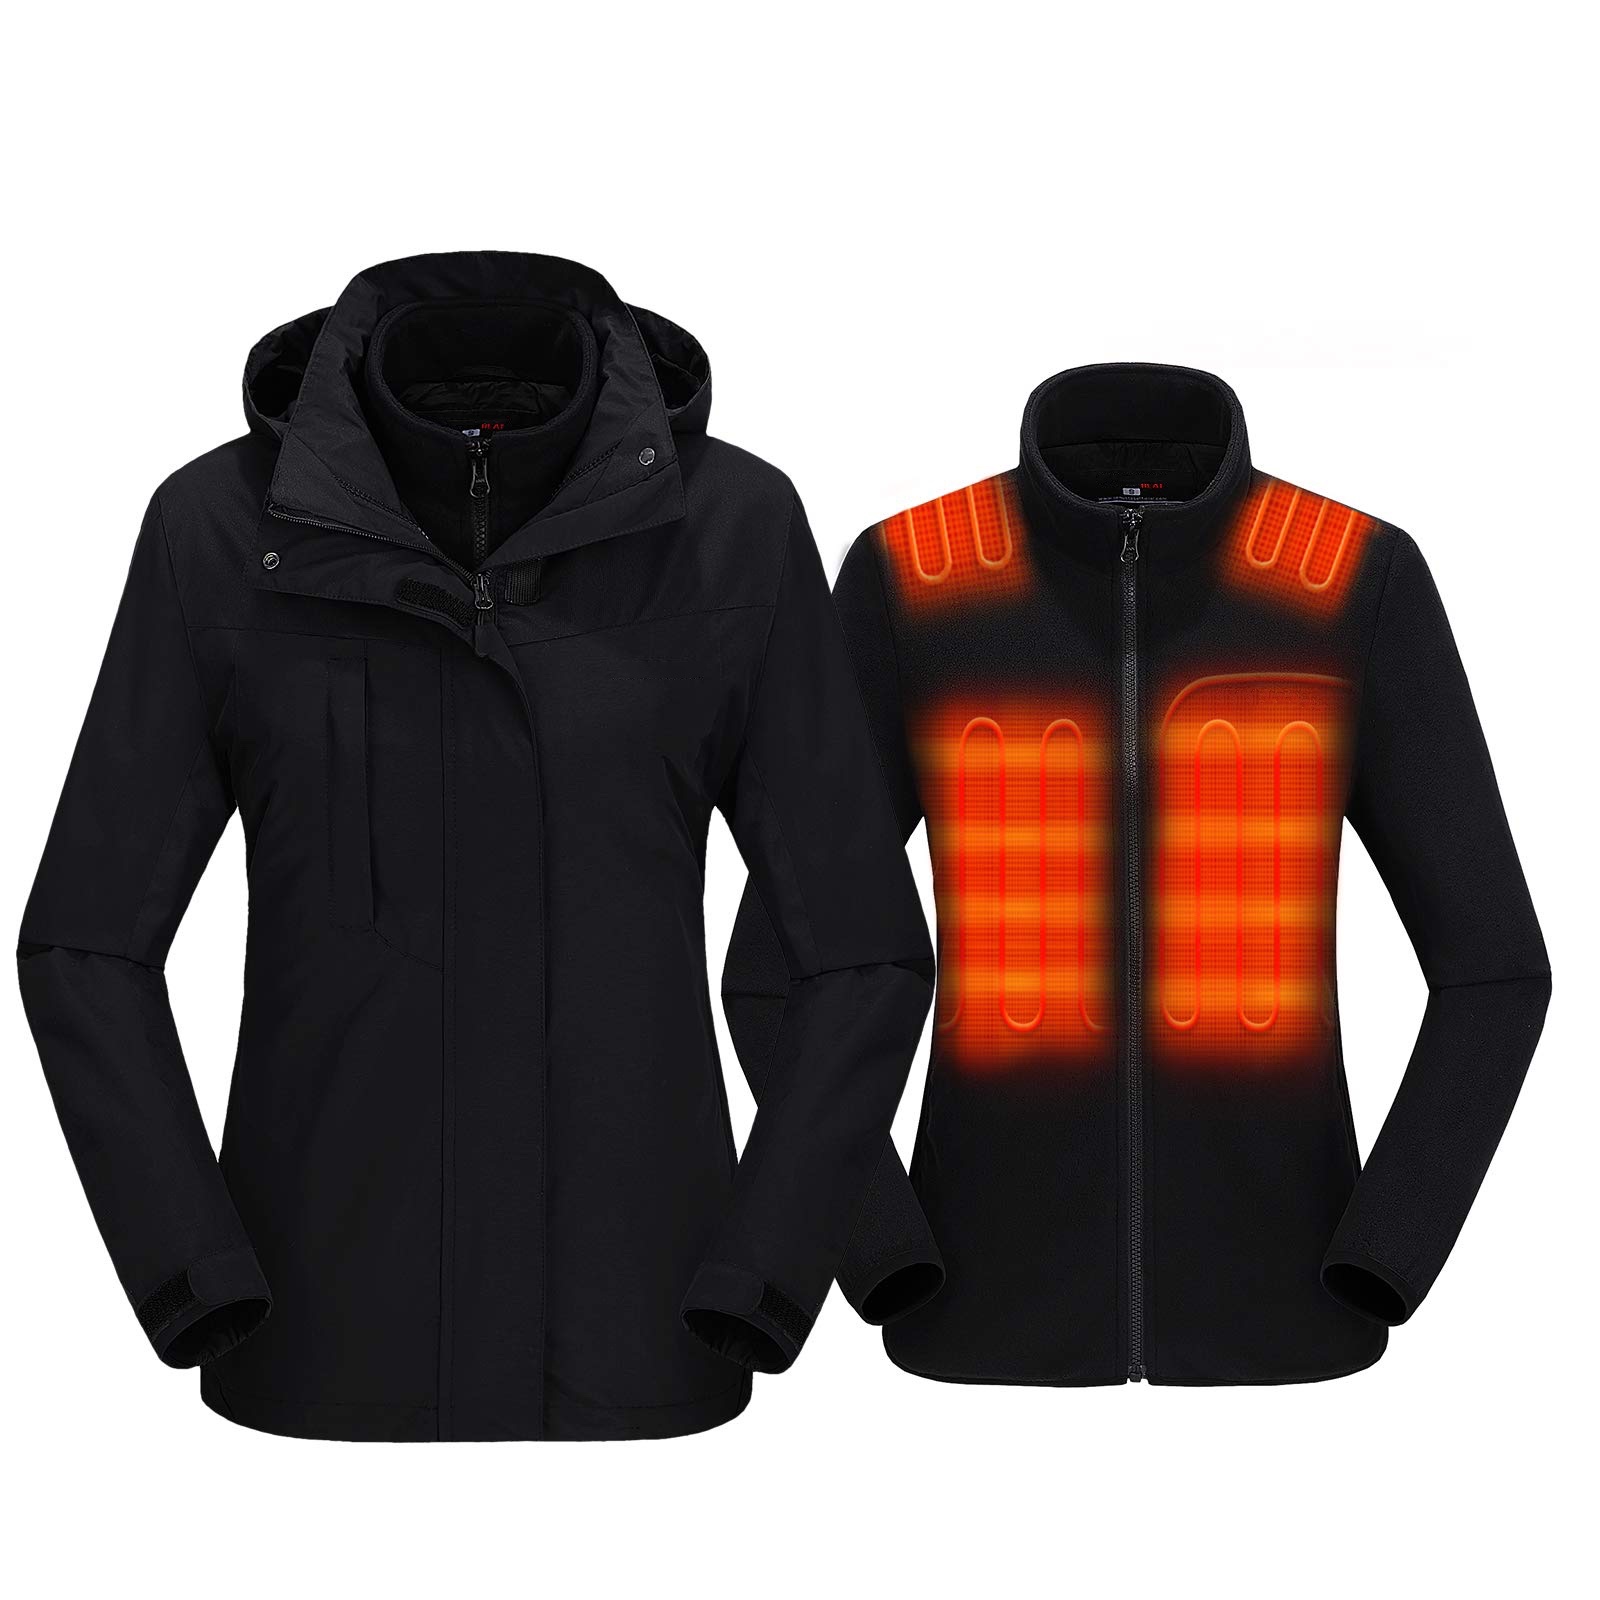 Women's 3-in-1 Heated Jacket with Battery Pack 5V Waterproof